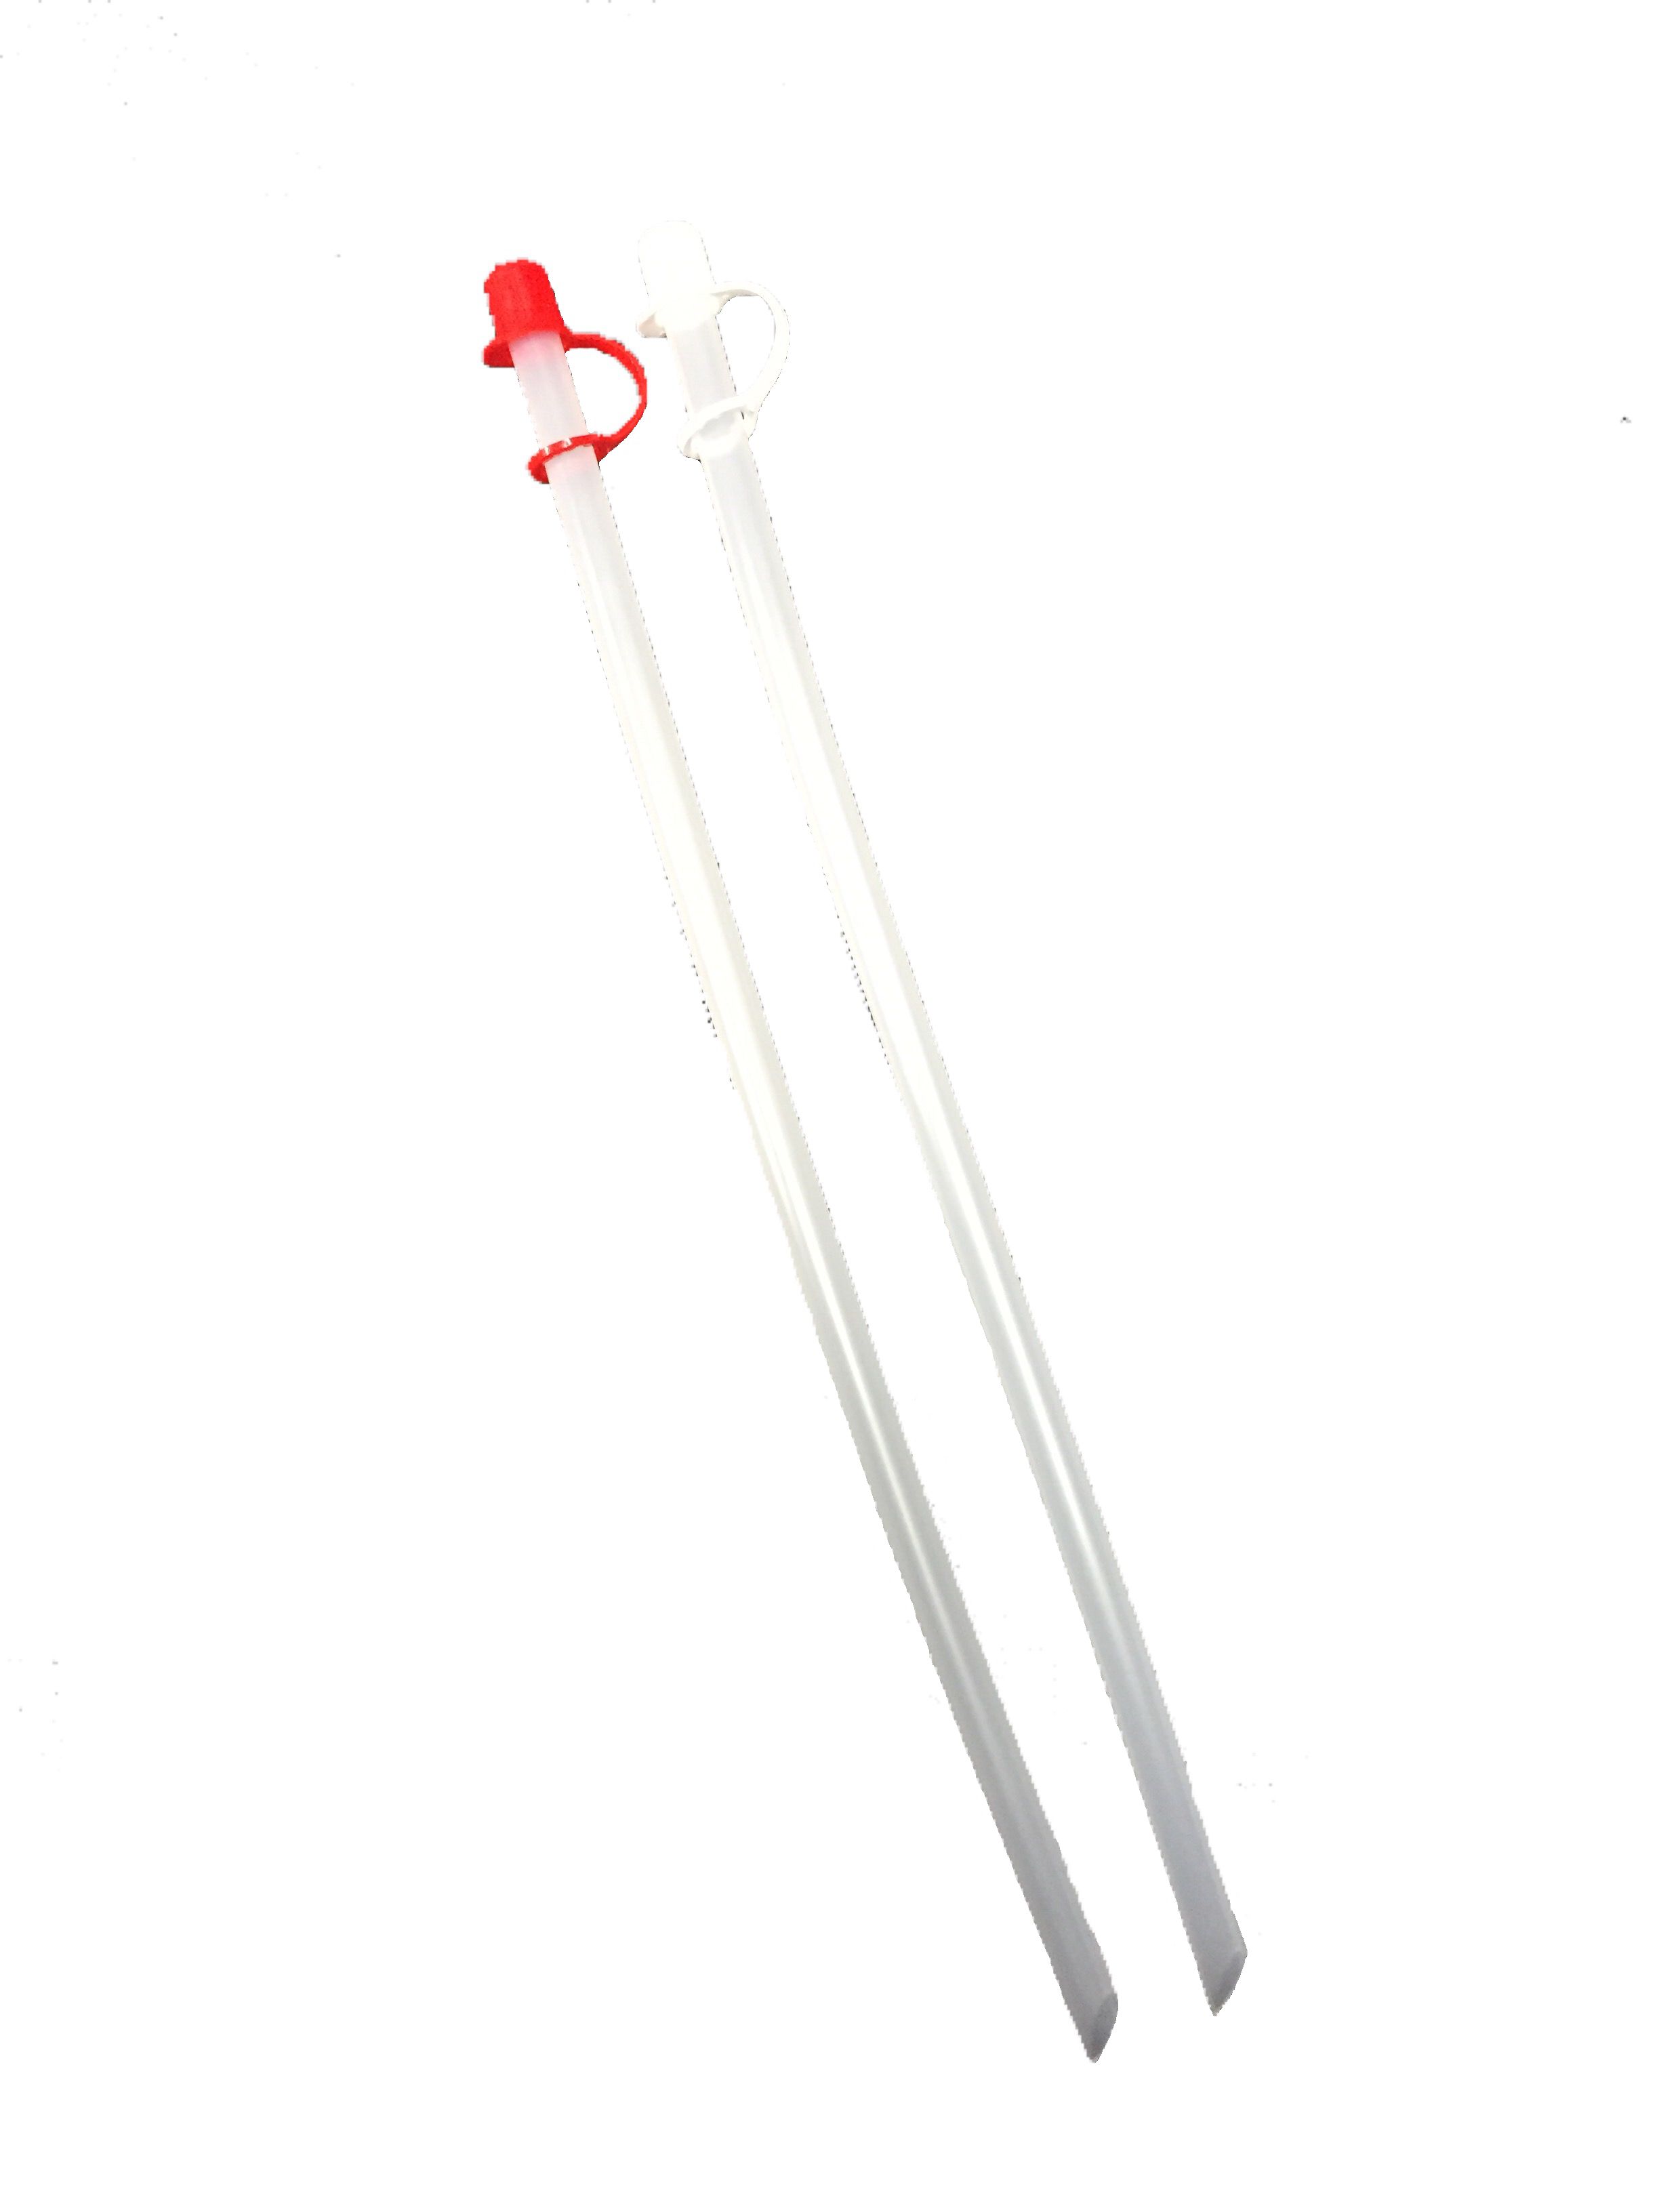 Bowling Pin Sipper Replacement Straw by Sierra Products